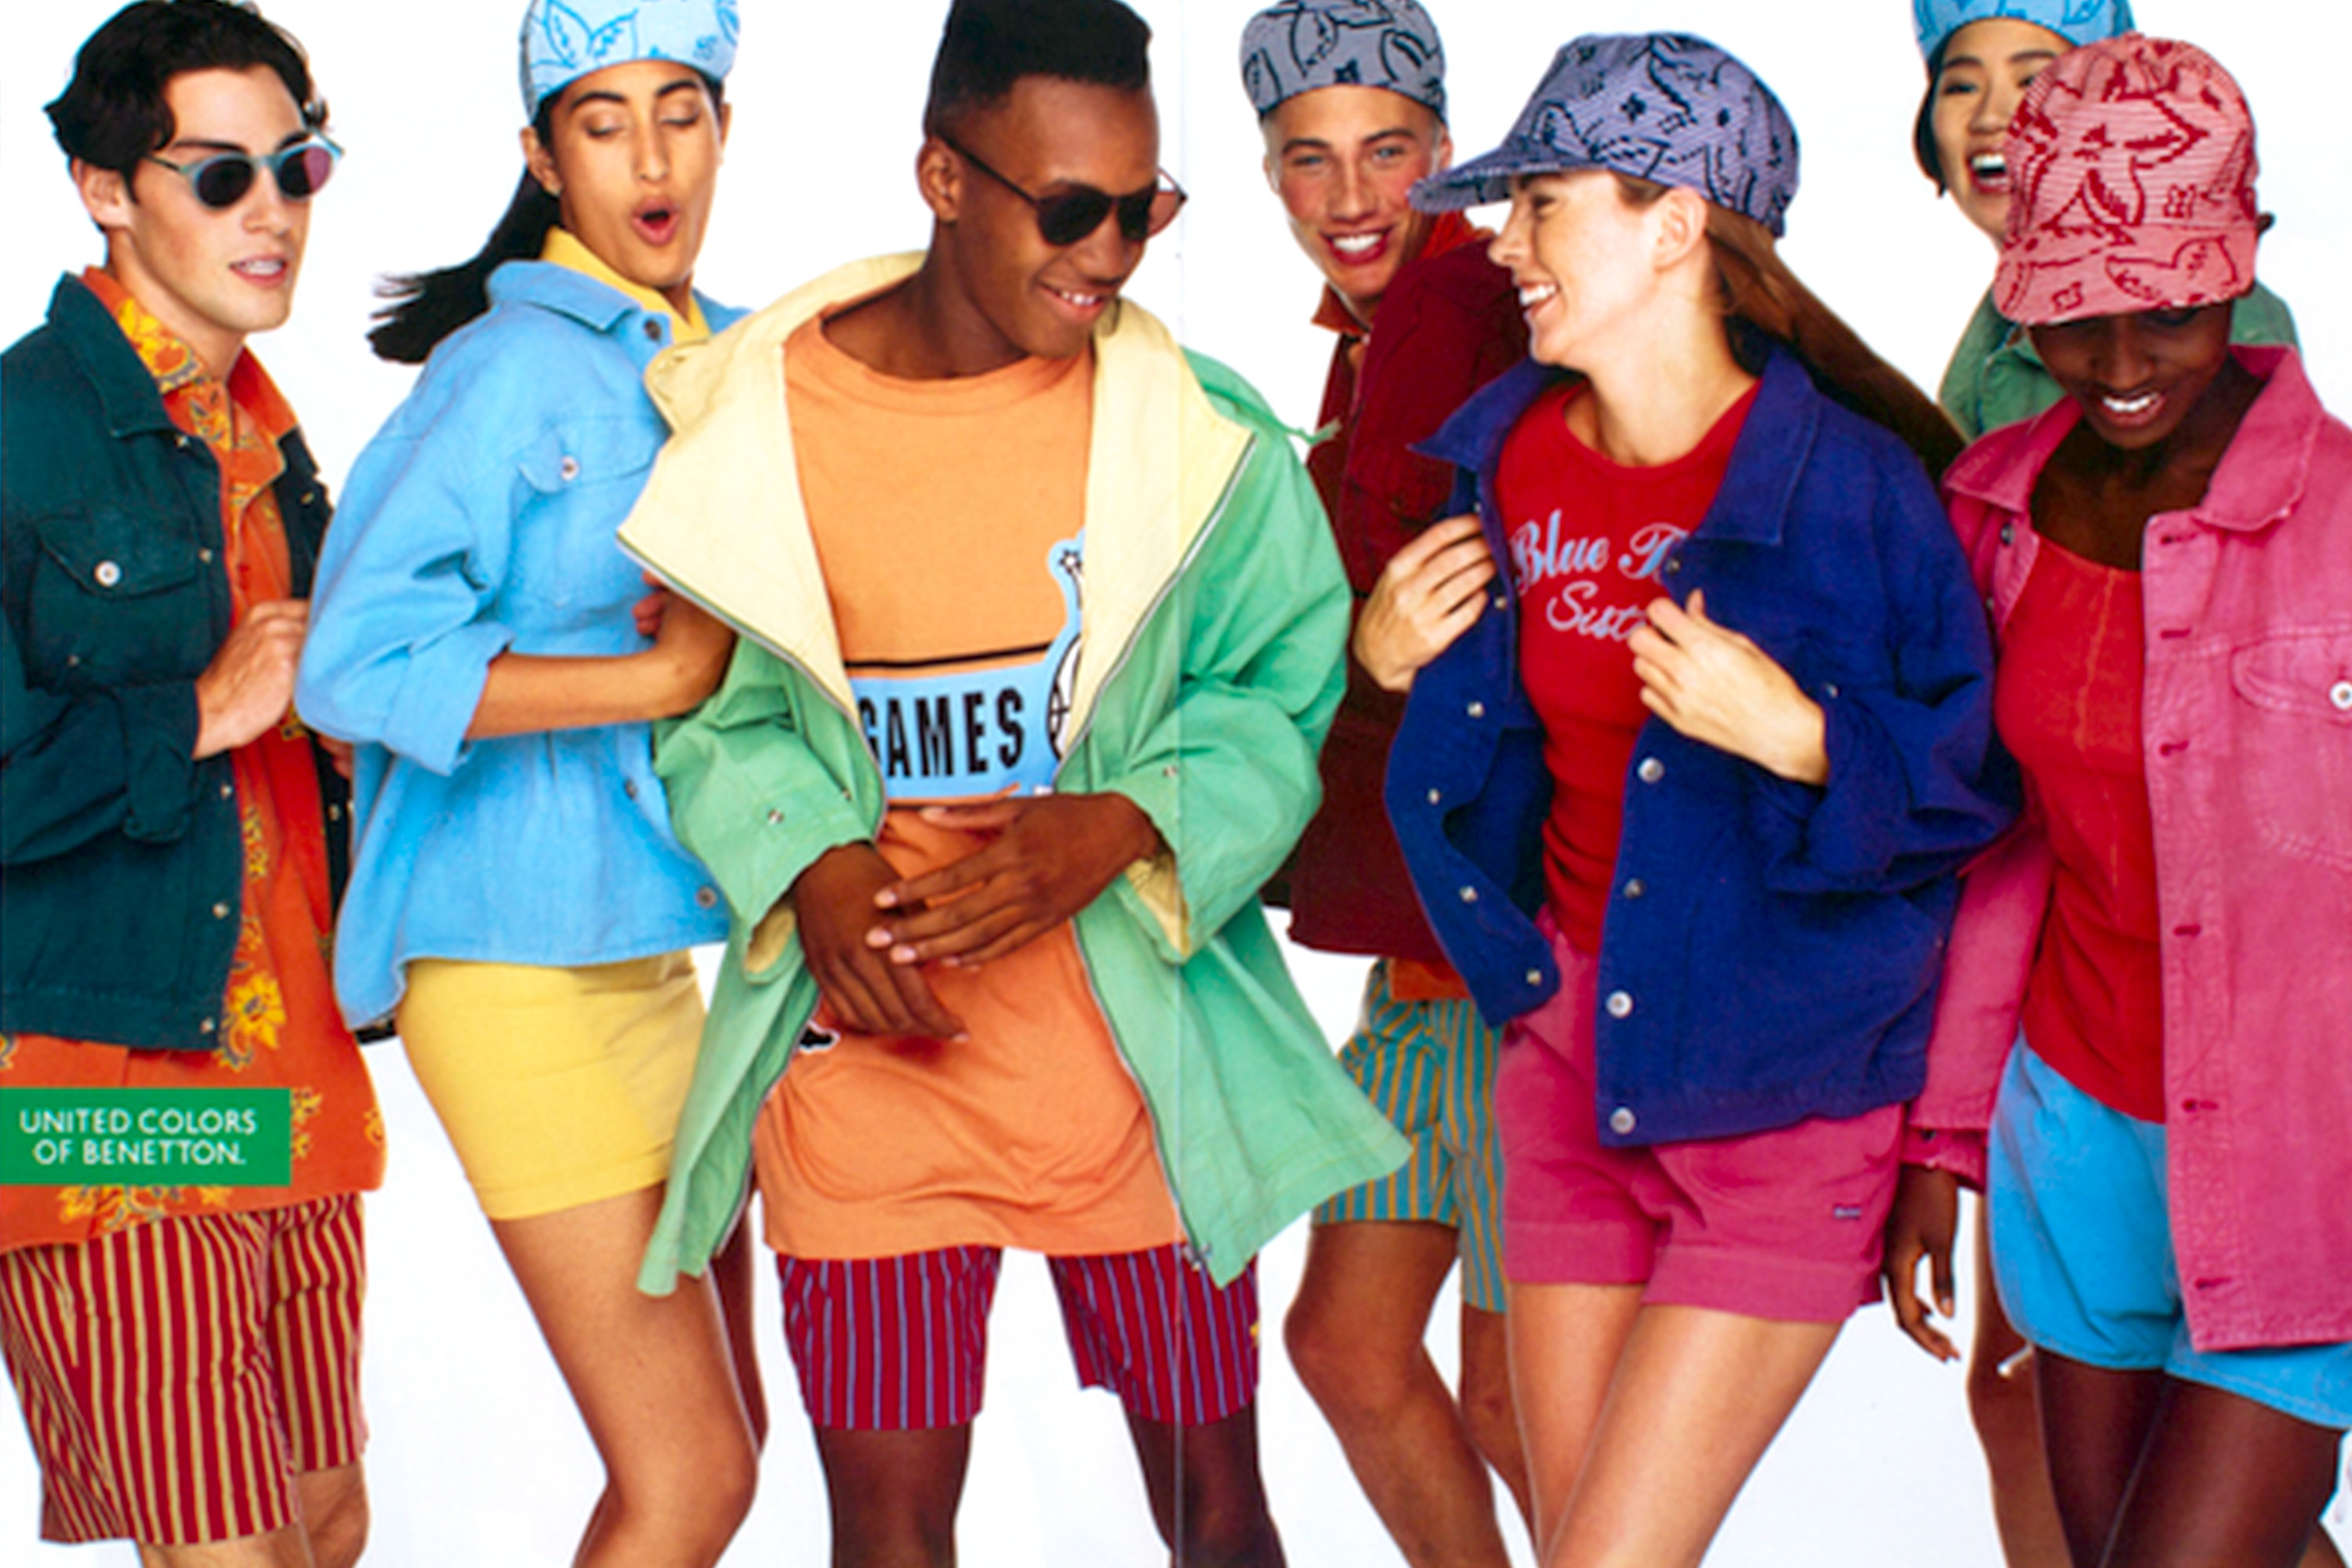 Change Some Things from Your Past and We’ll Reveal How Bright Your Future Is 90s fashion